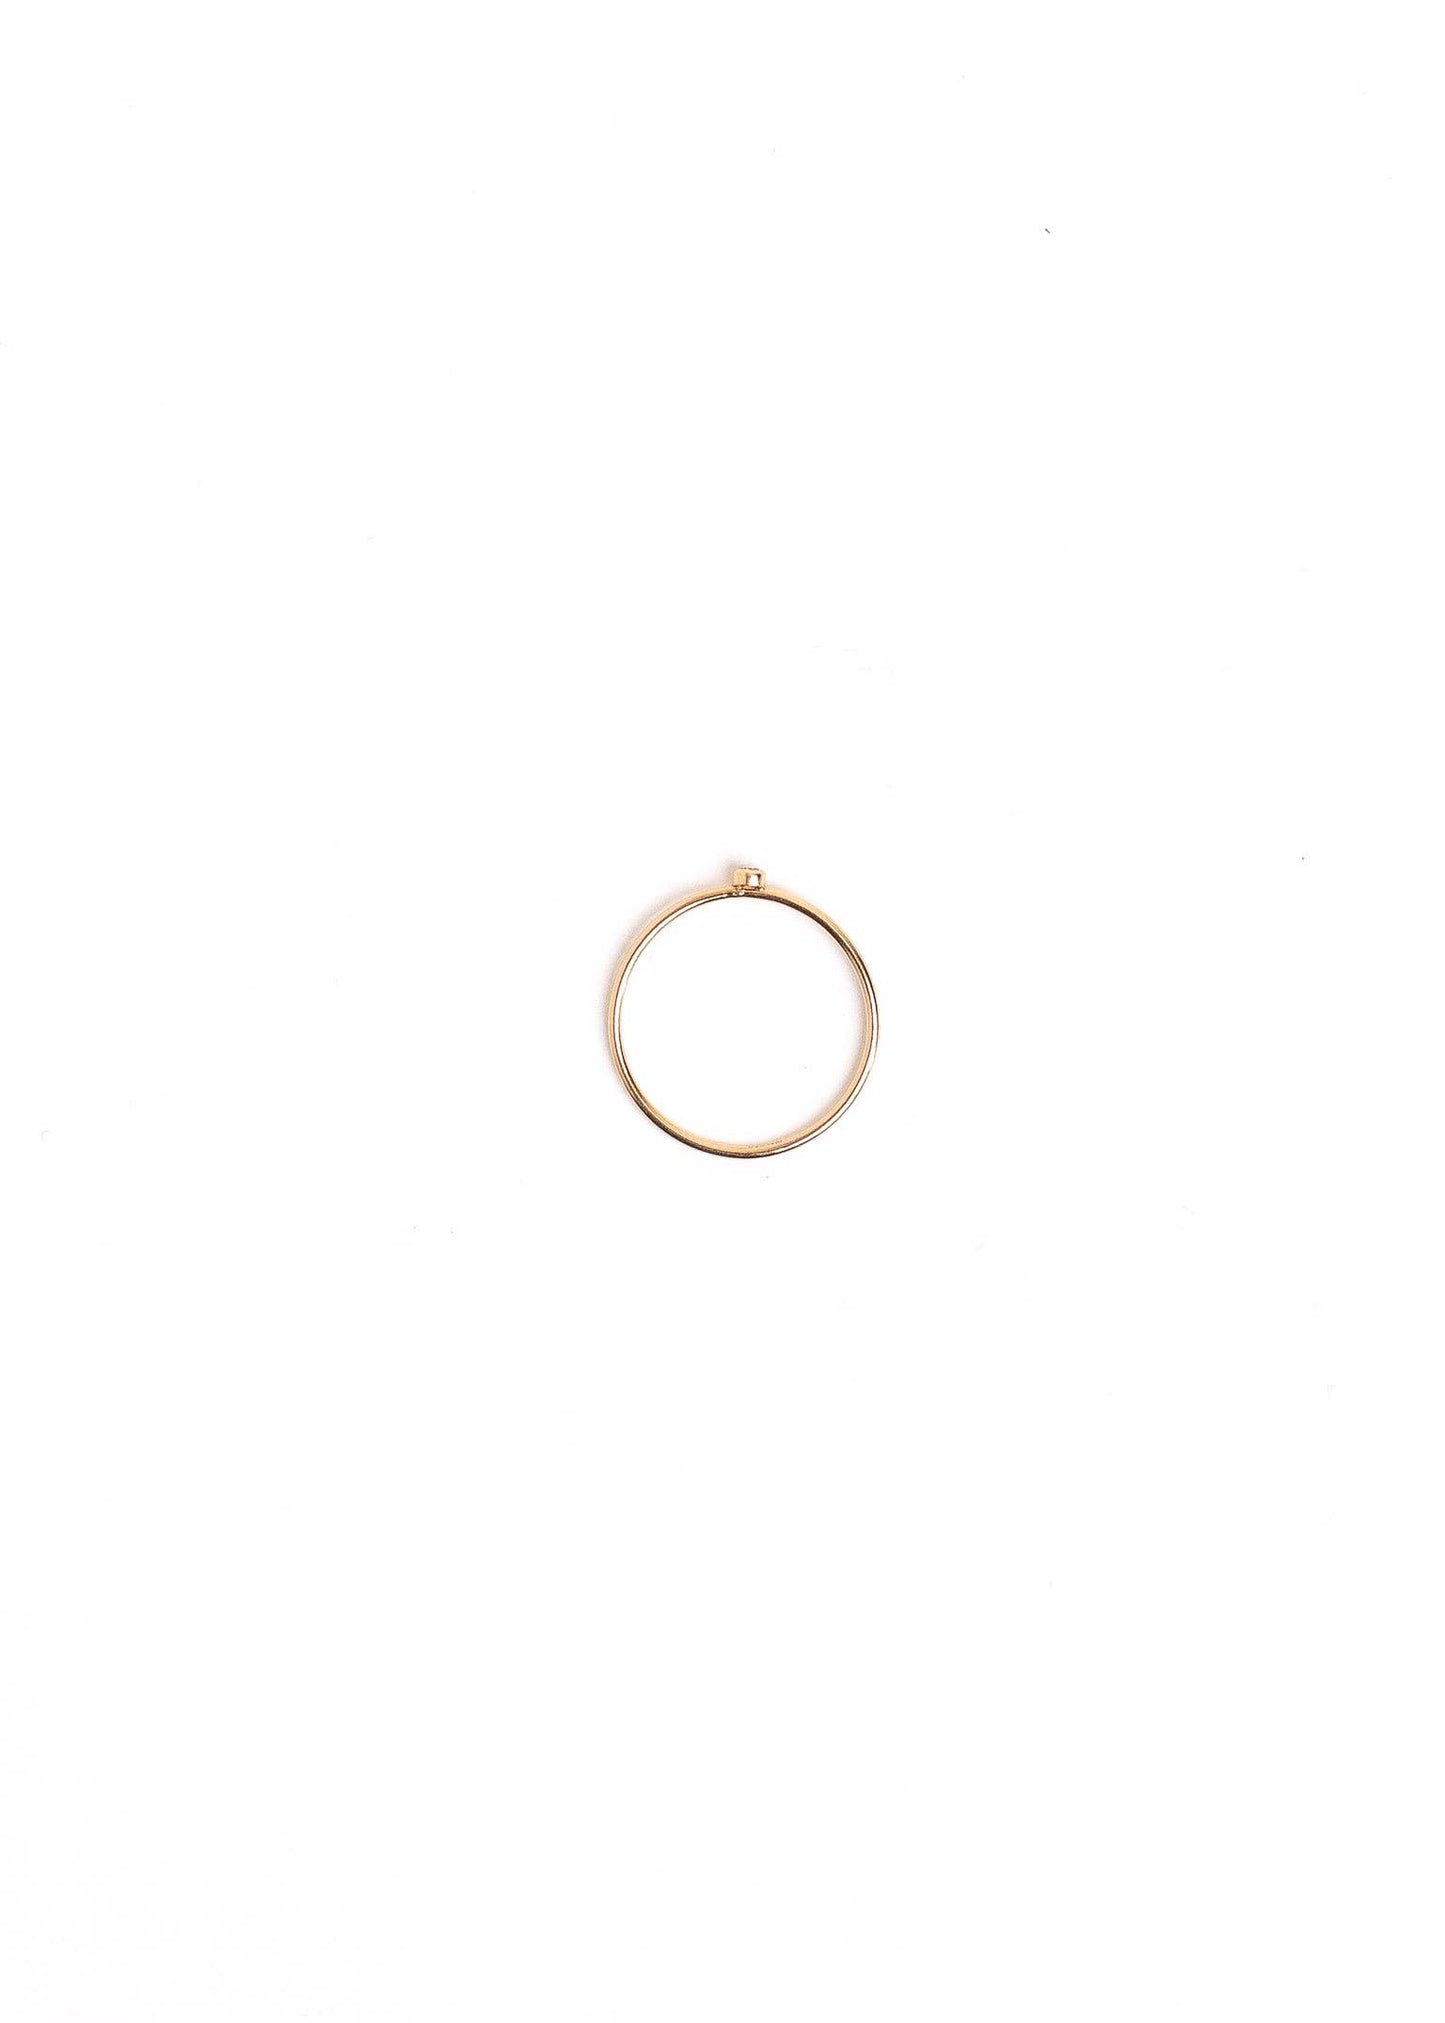 Go Rings - Bezel Stackable Ring - Size 5